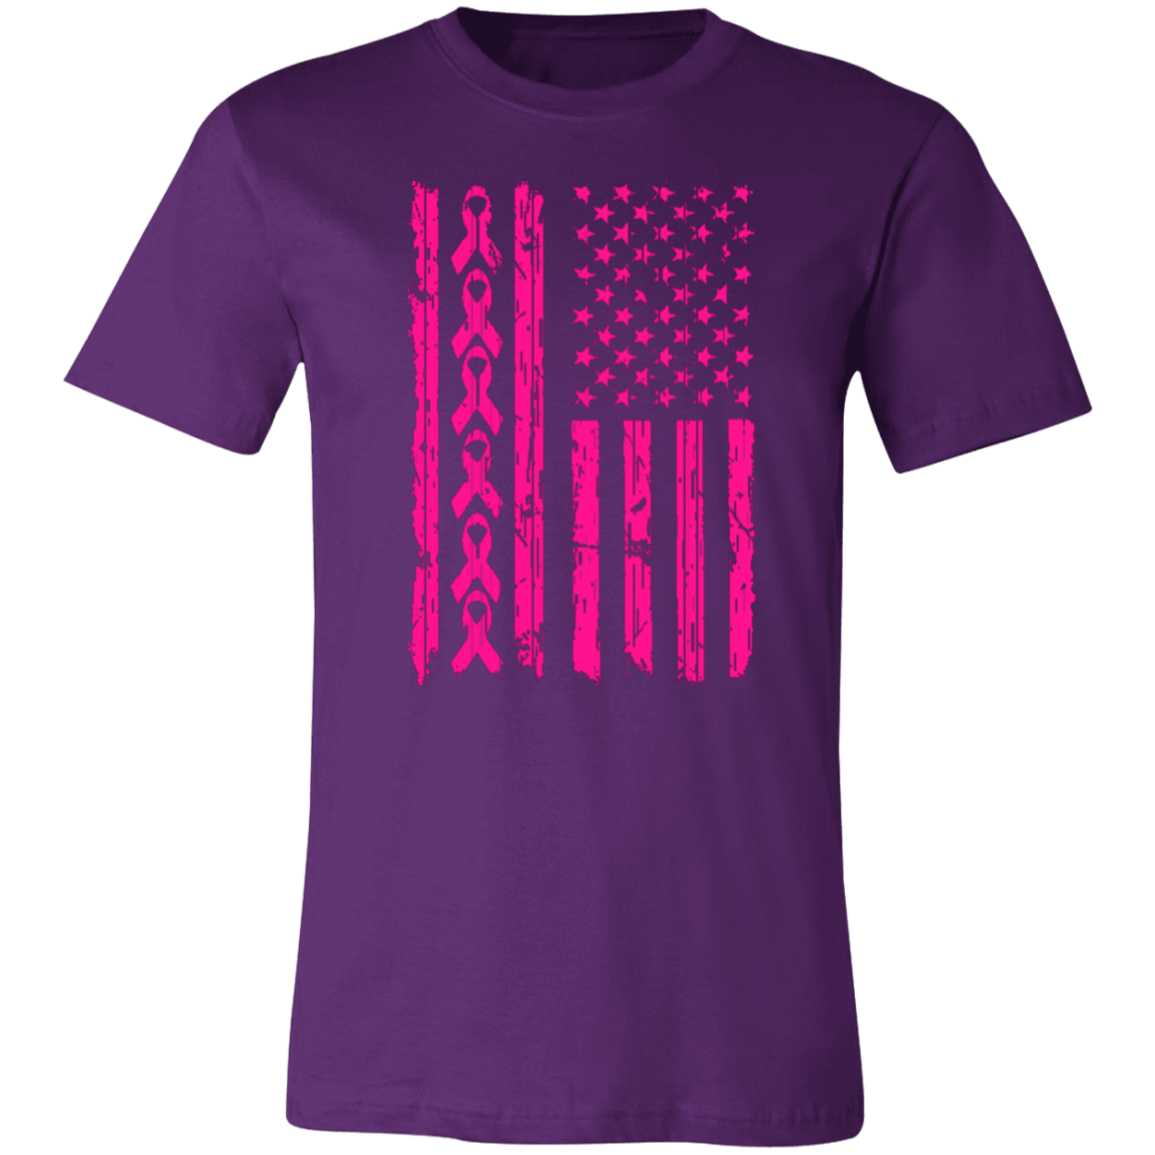 Breast Cancer Support Jersey Short-Sleeve T-Shirt